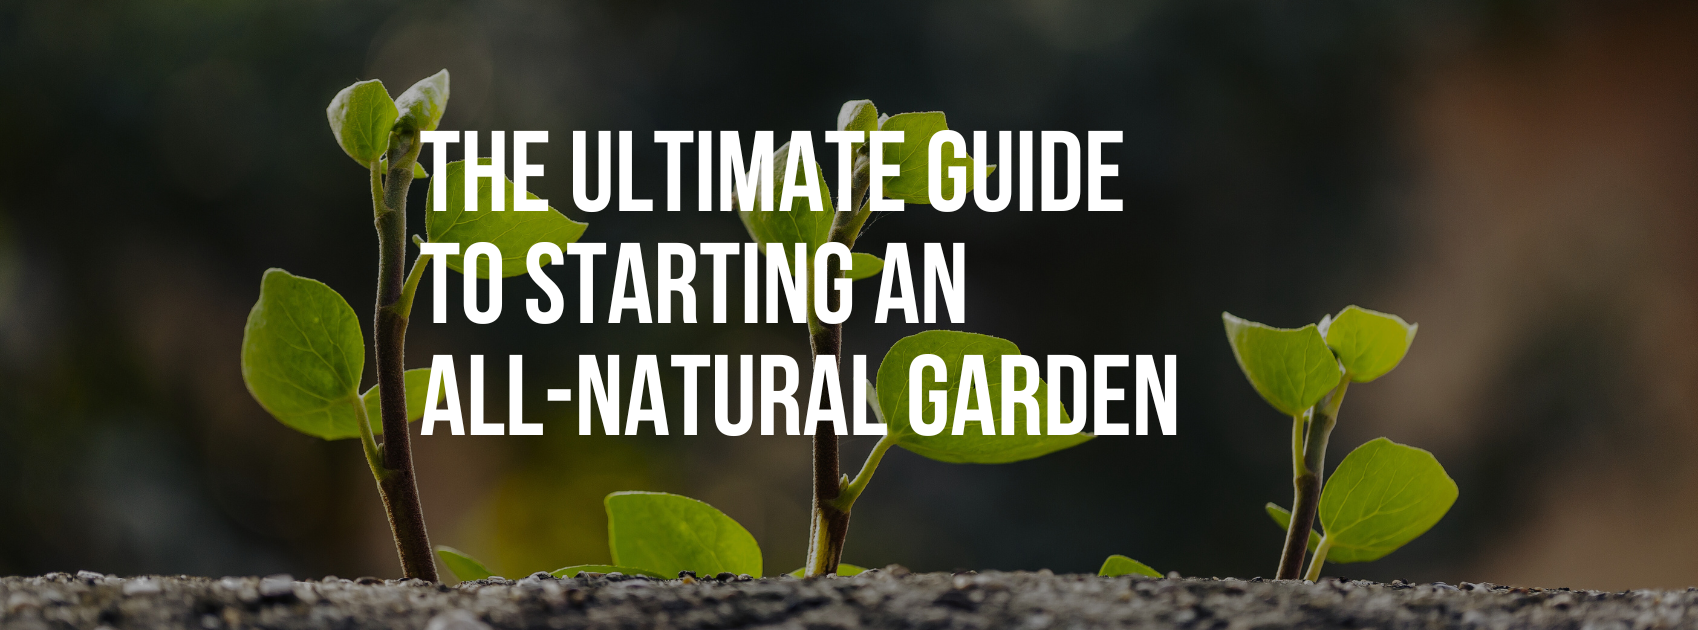 The Ultimate Guide to Starting an All-Natural Garden